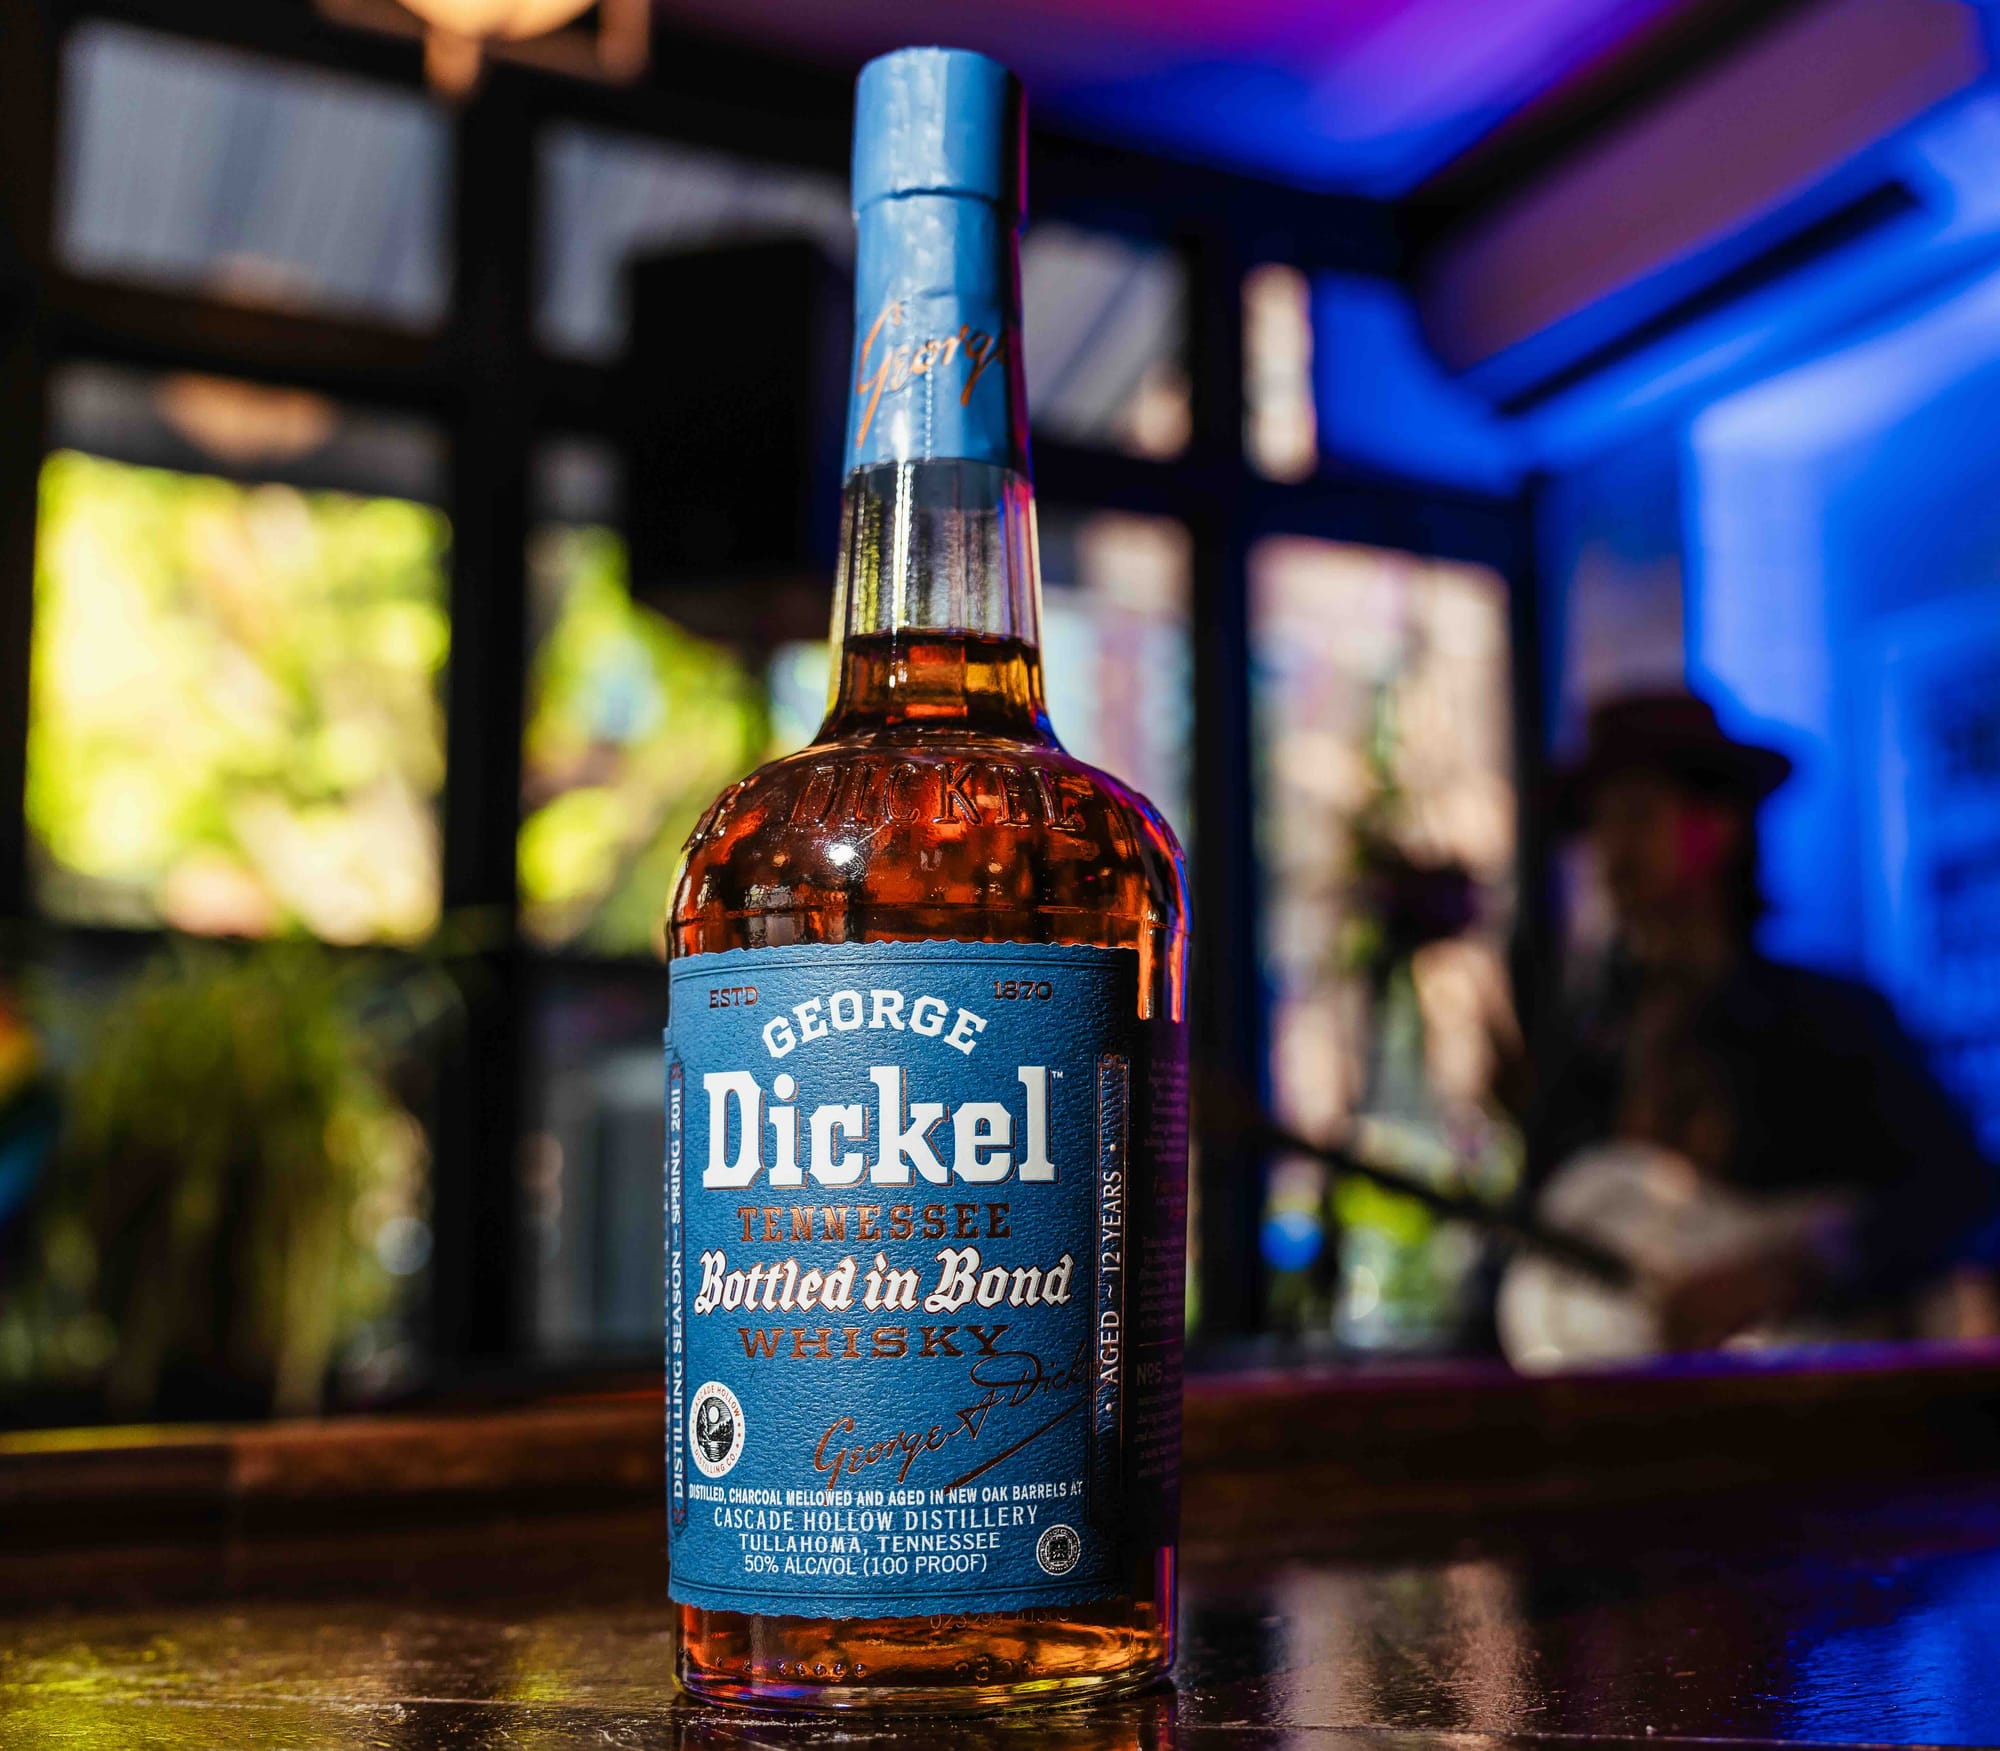 George Dickel Bottled-In-Bond Spring 2011 Tennessee Whisky Review